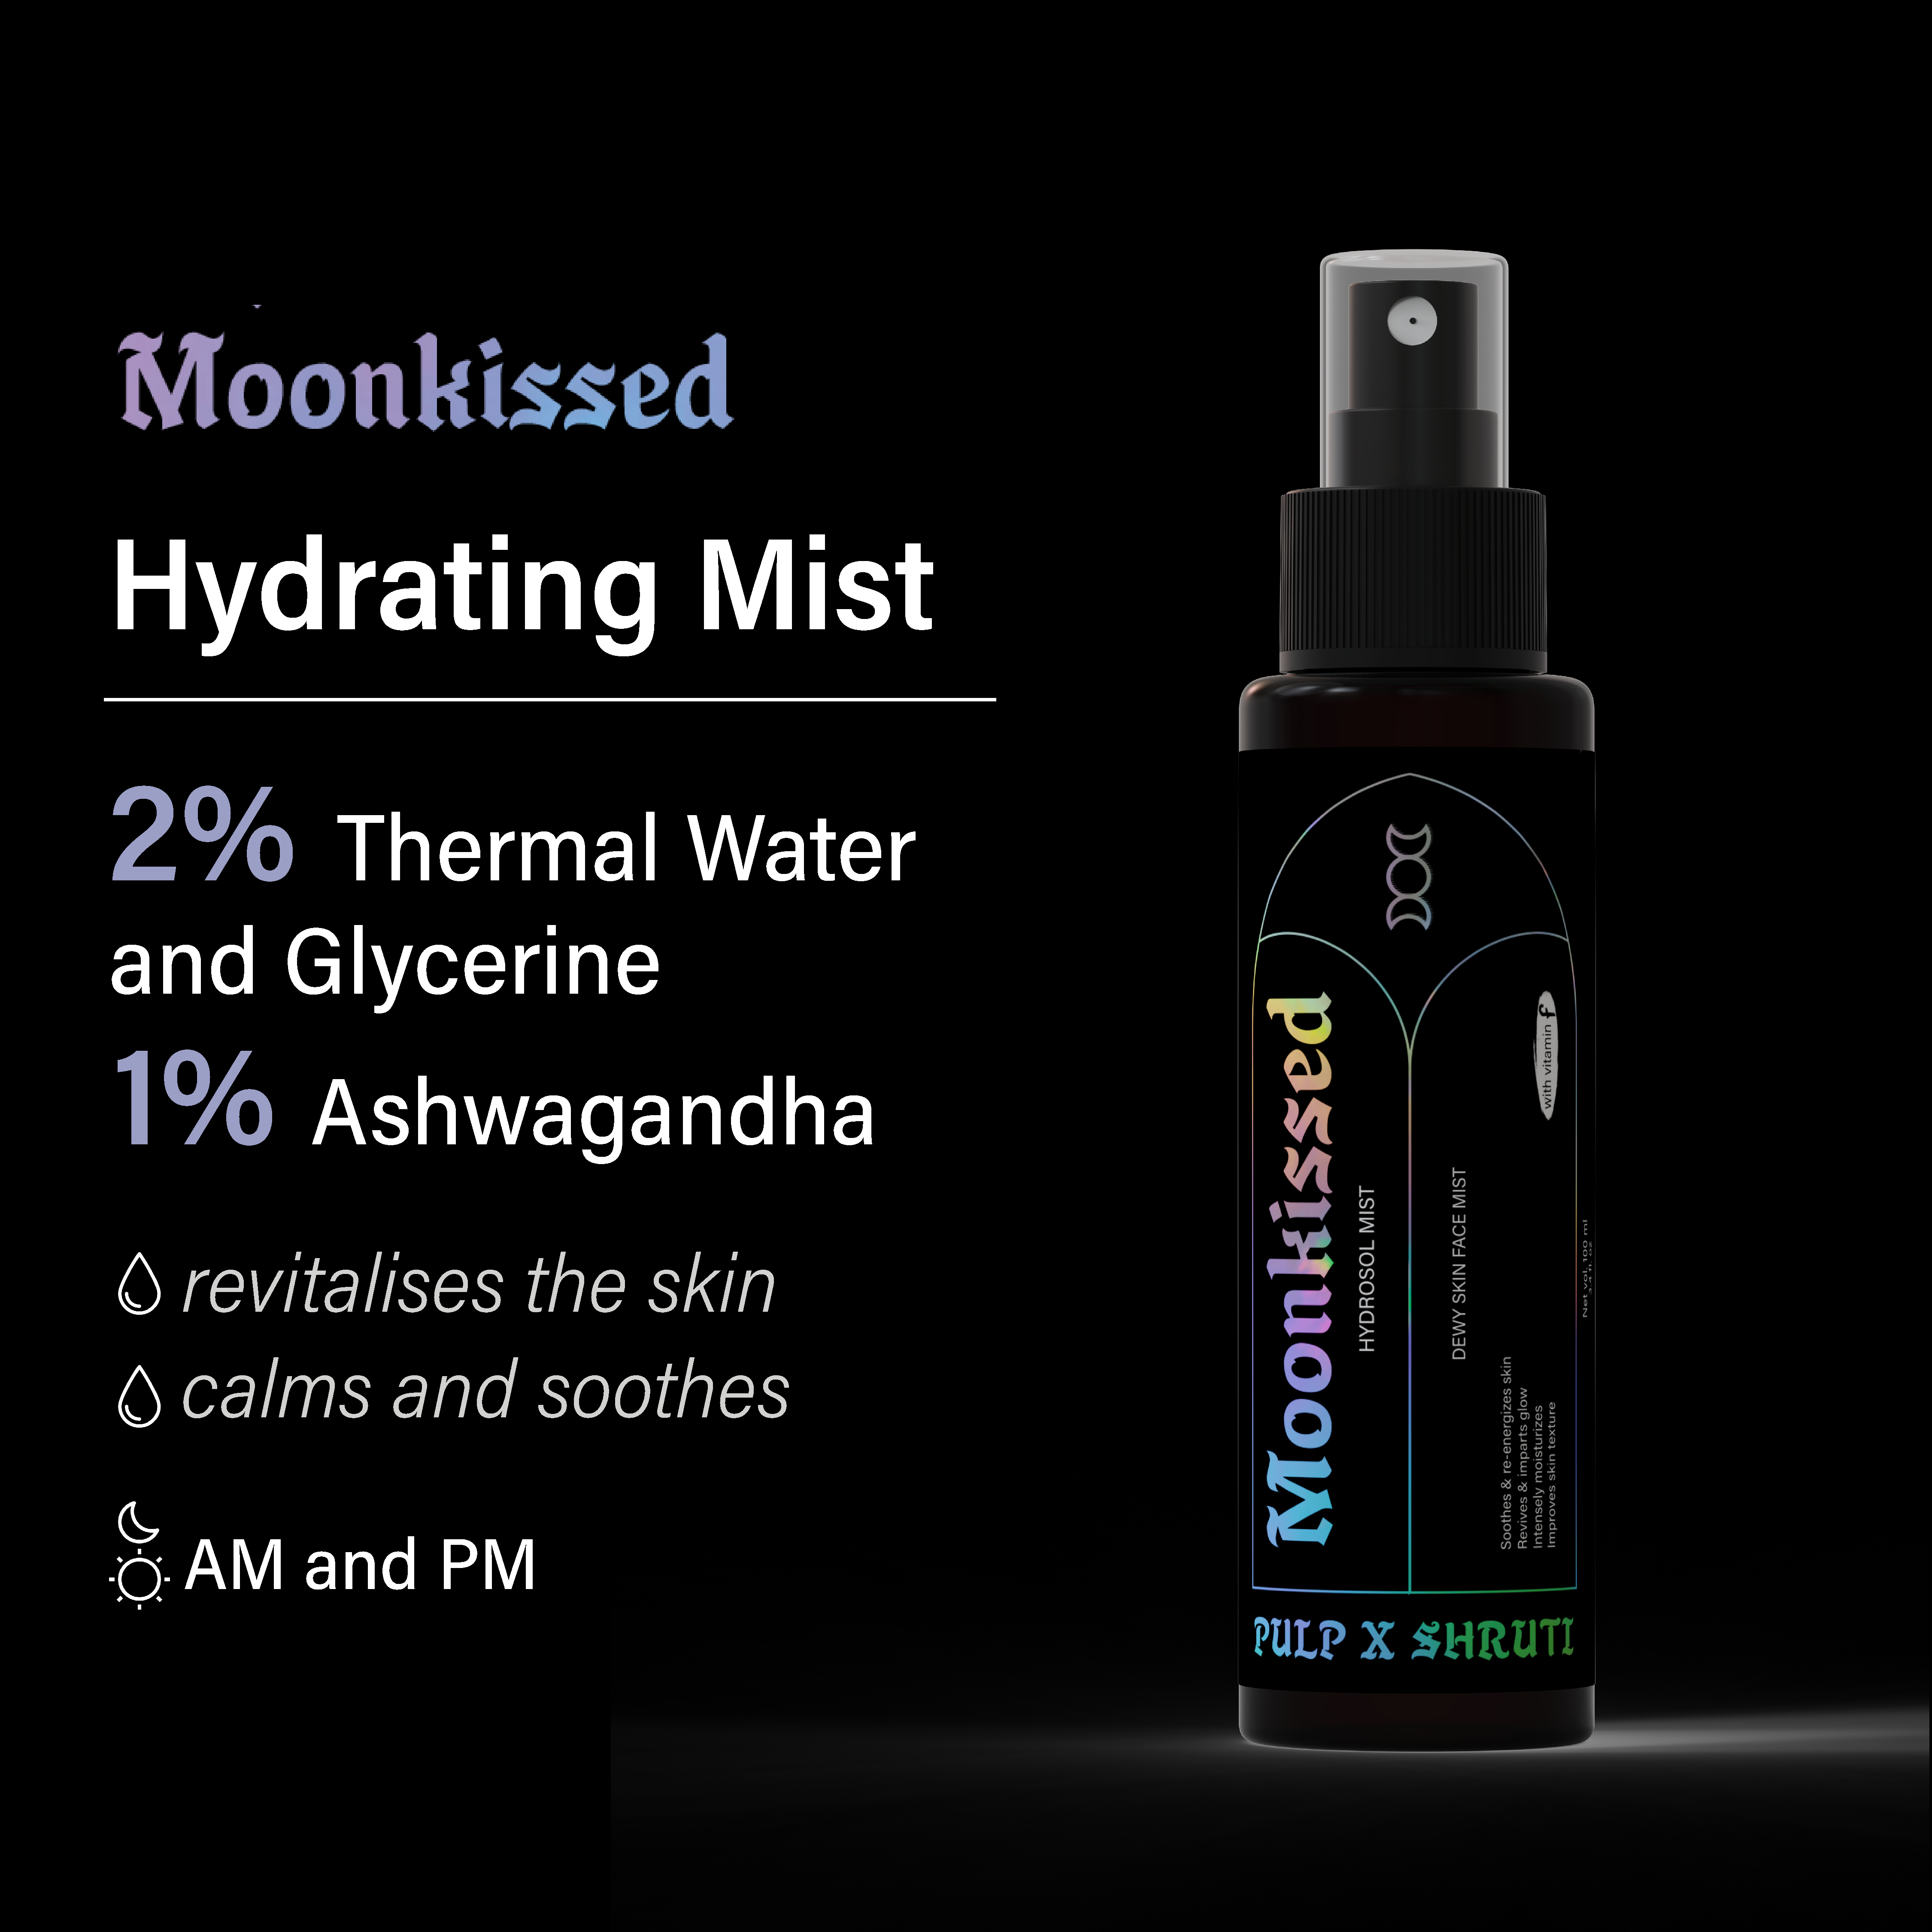 Pulp Hydrating Facial Mist | Moonkissed |100ml